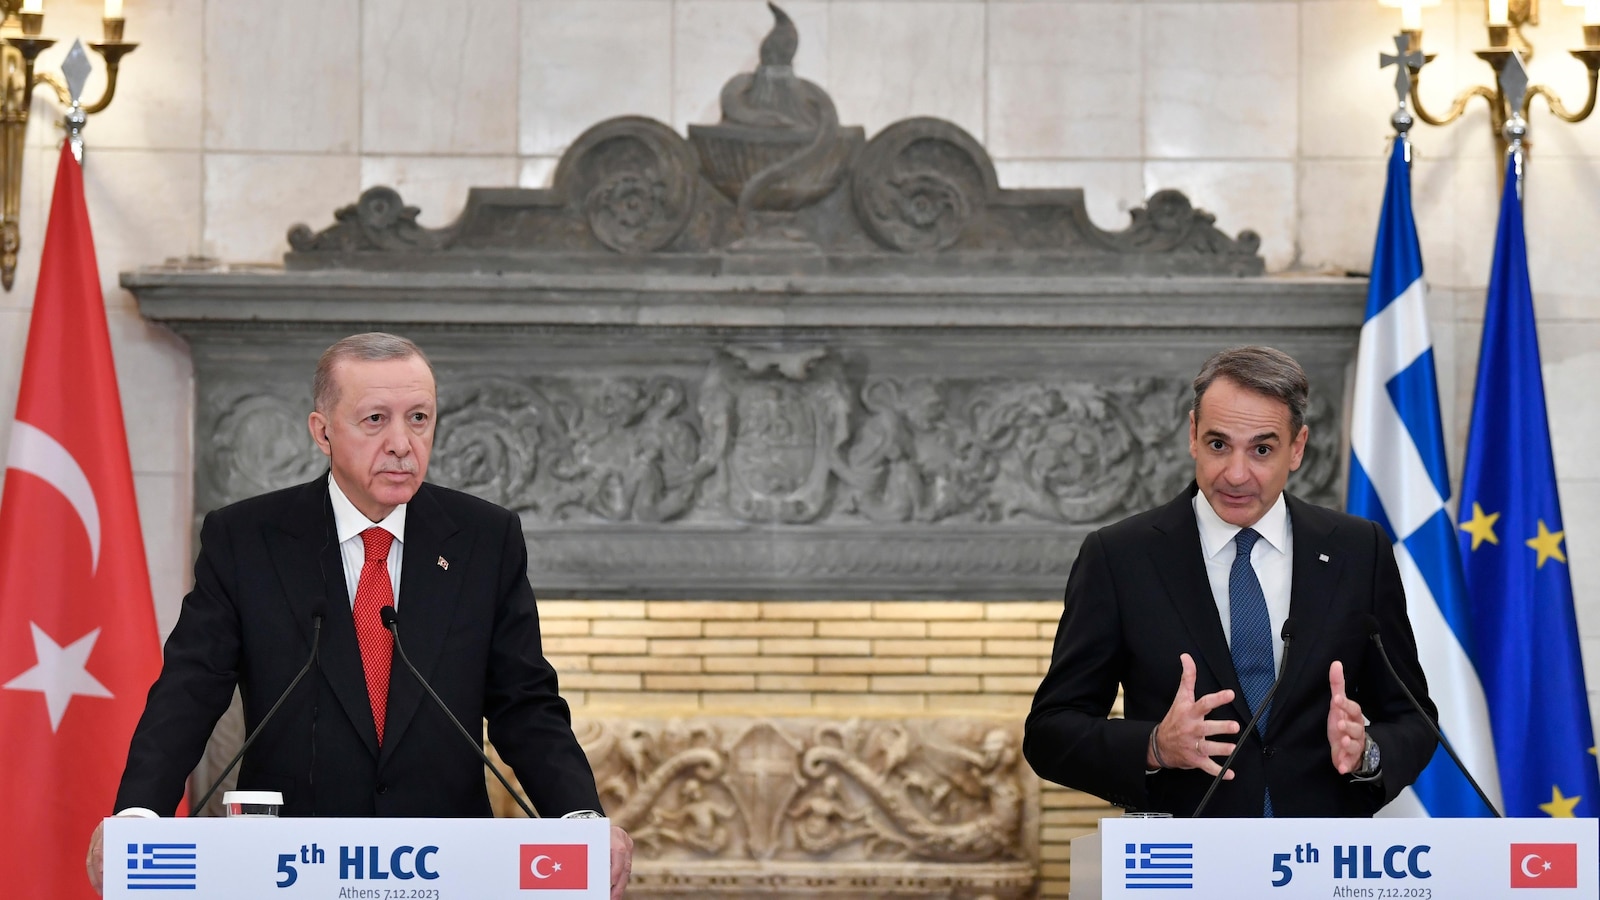 Greek and Turkish leaders are trying to emphasize thawing relations, but tensions remain beneath the surface